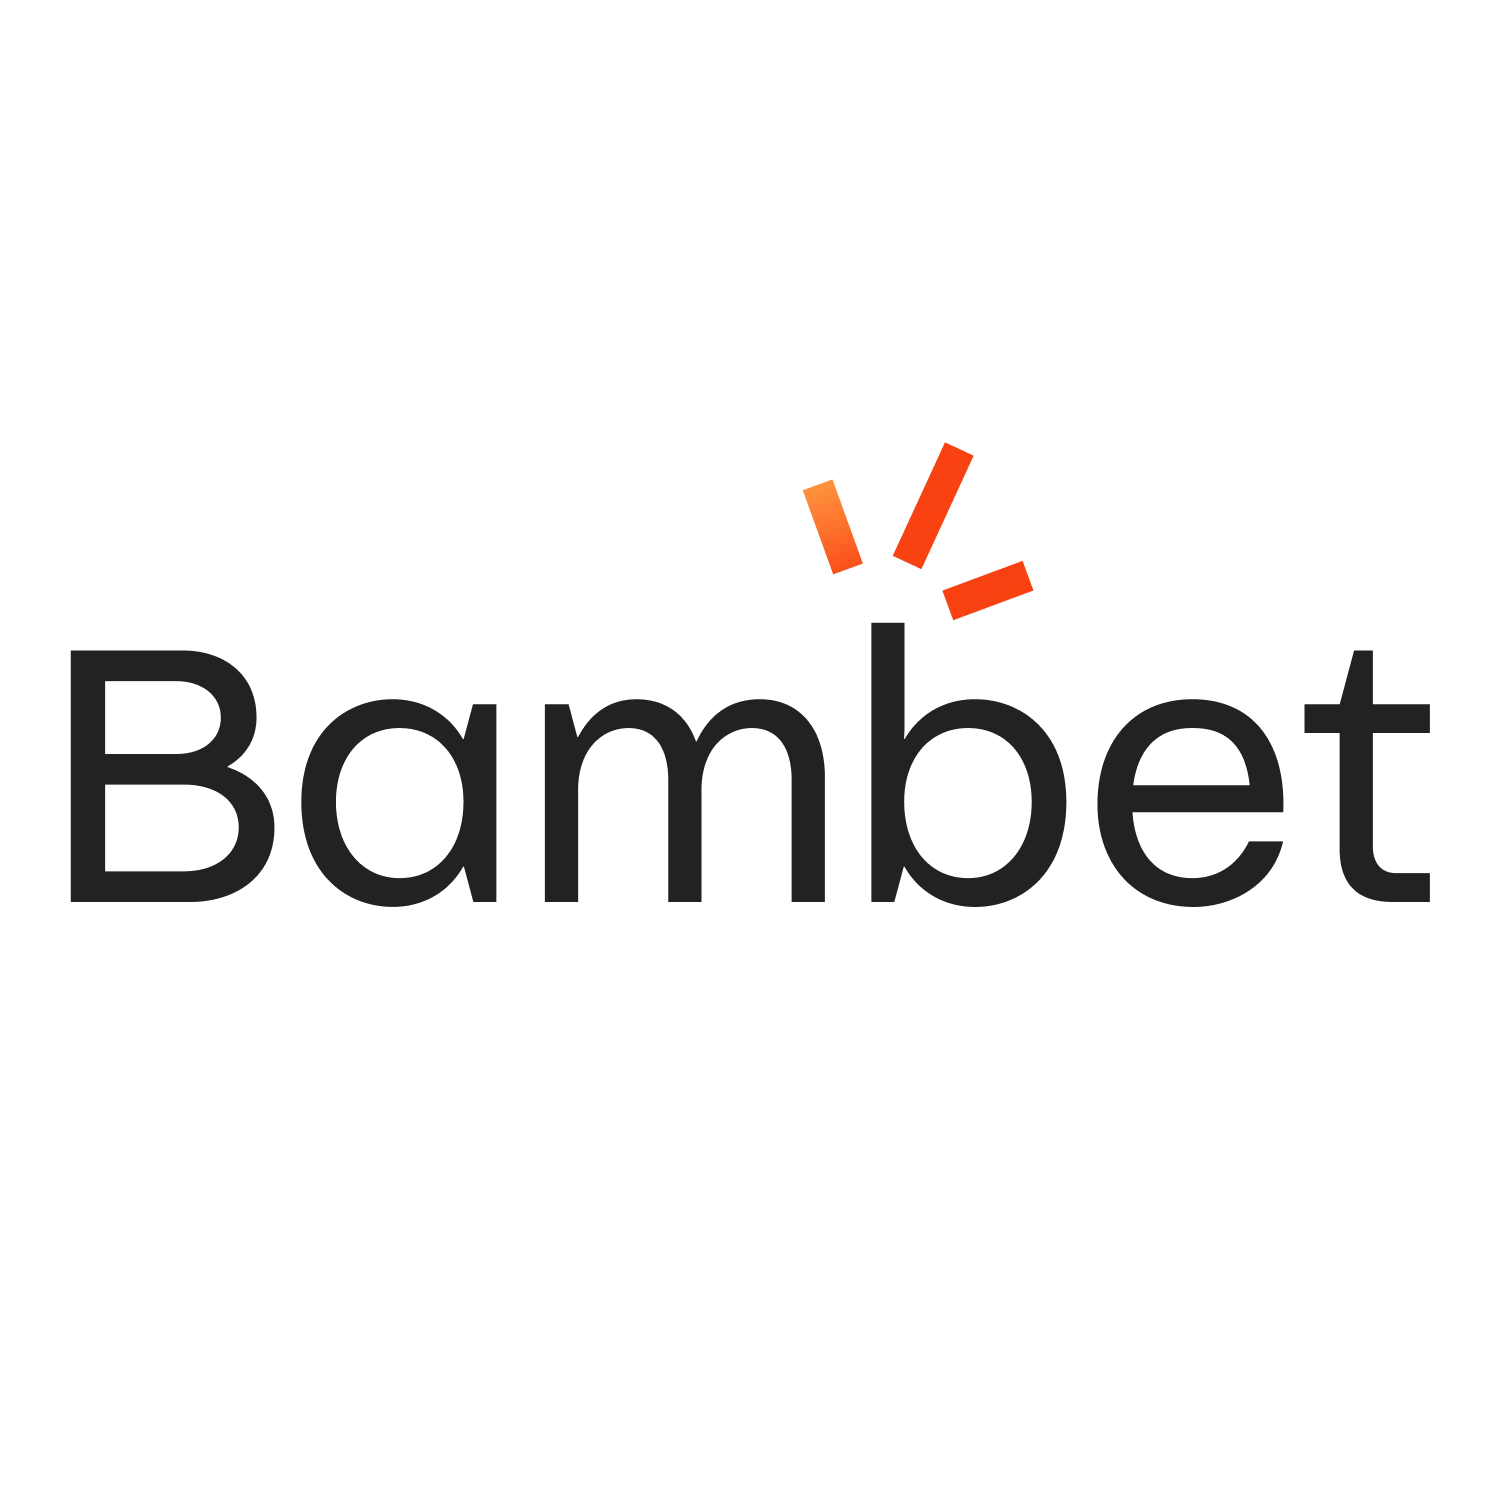 Bambet offers its casino players many games and options for sports betting.